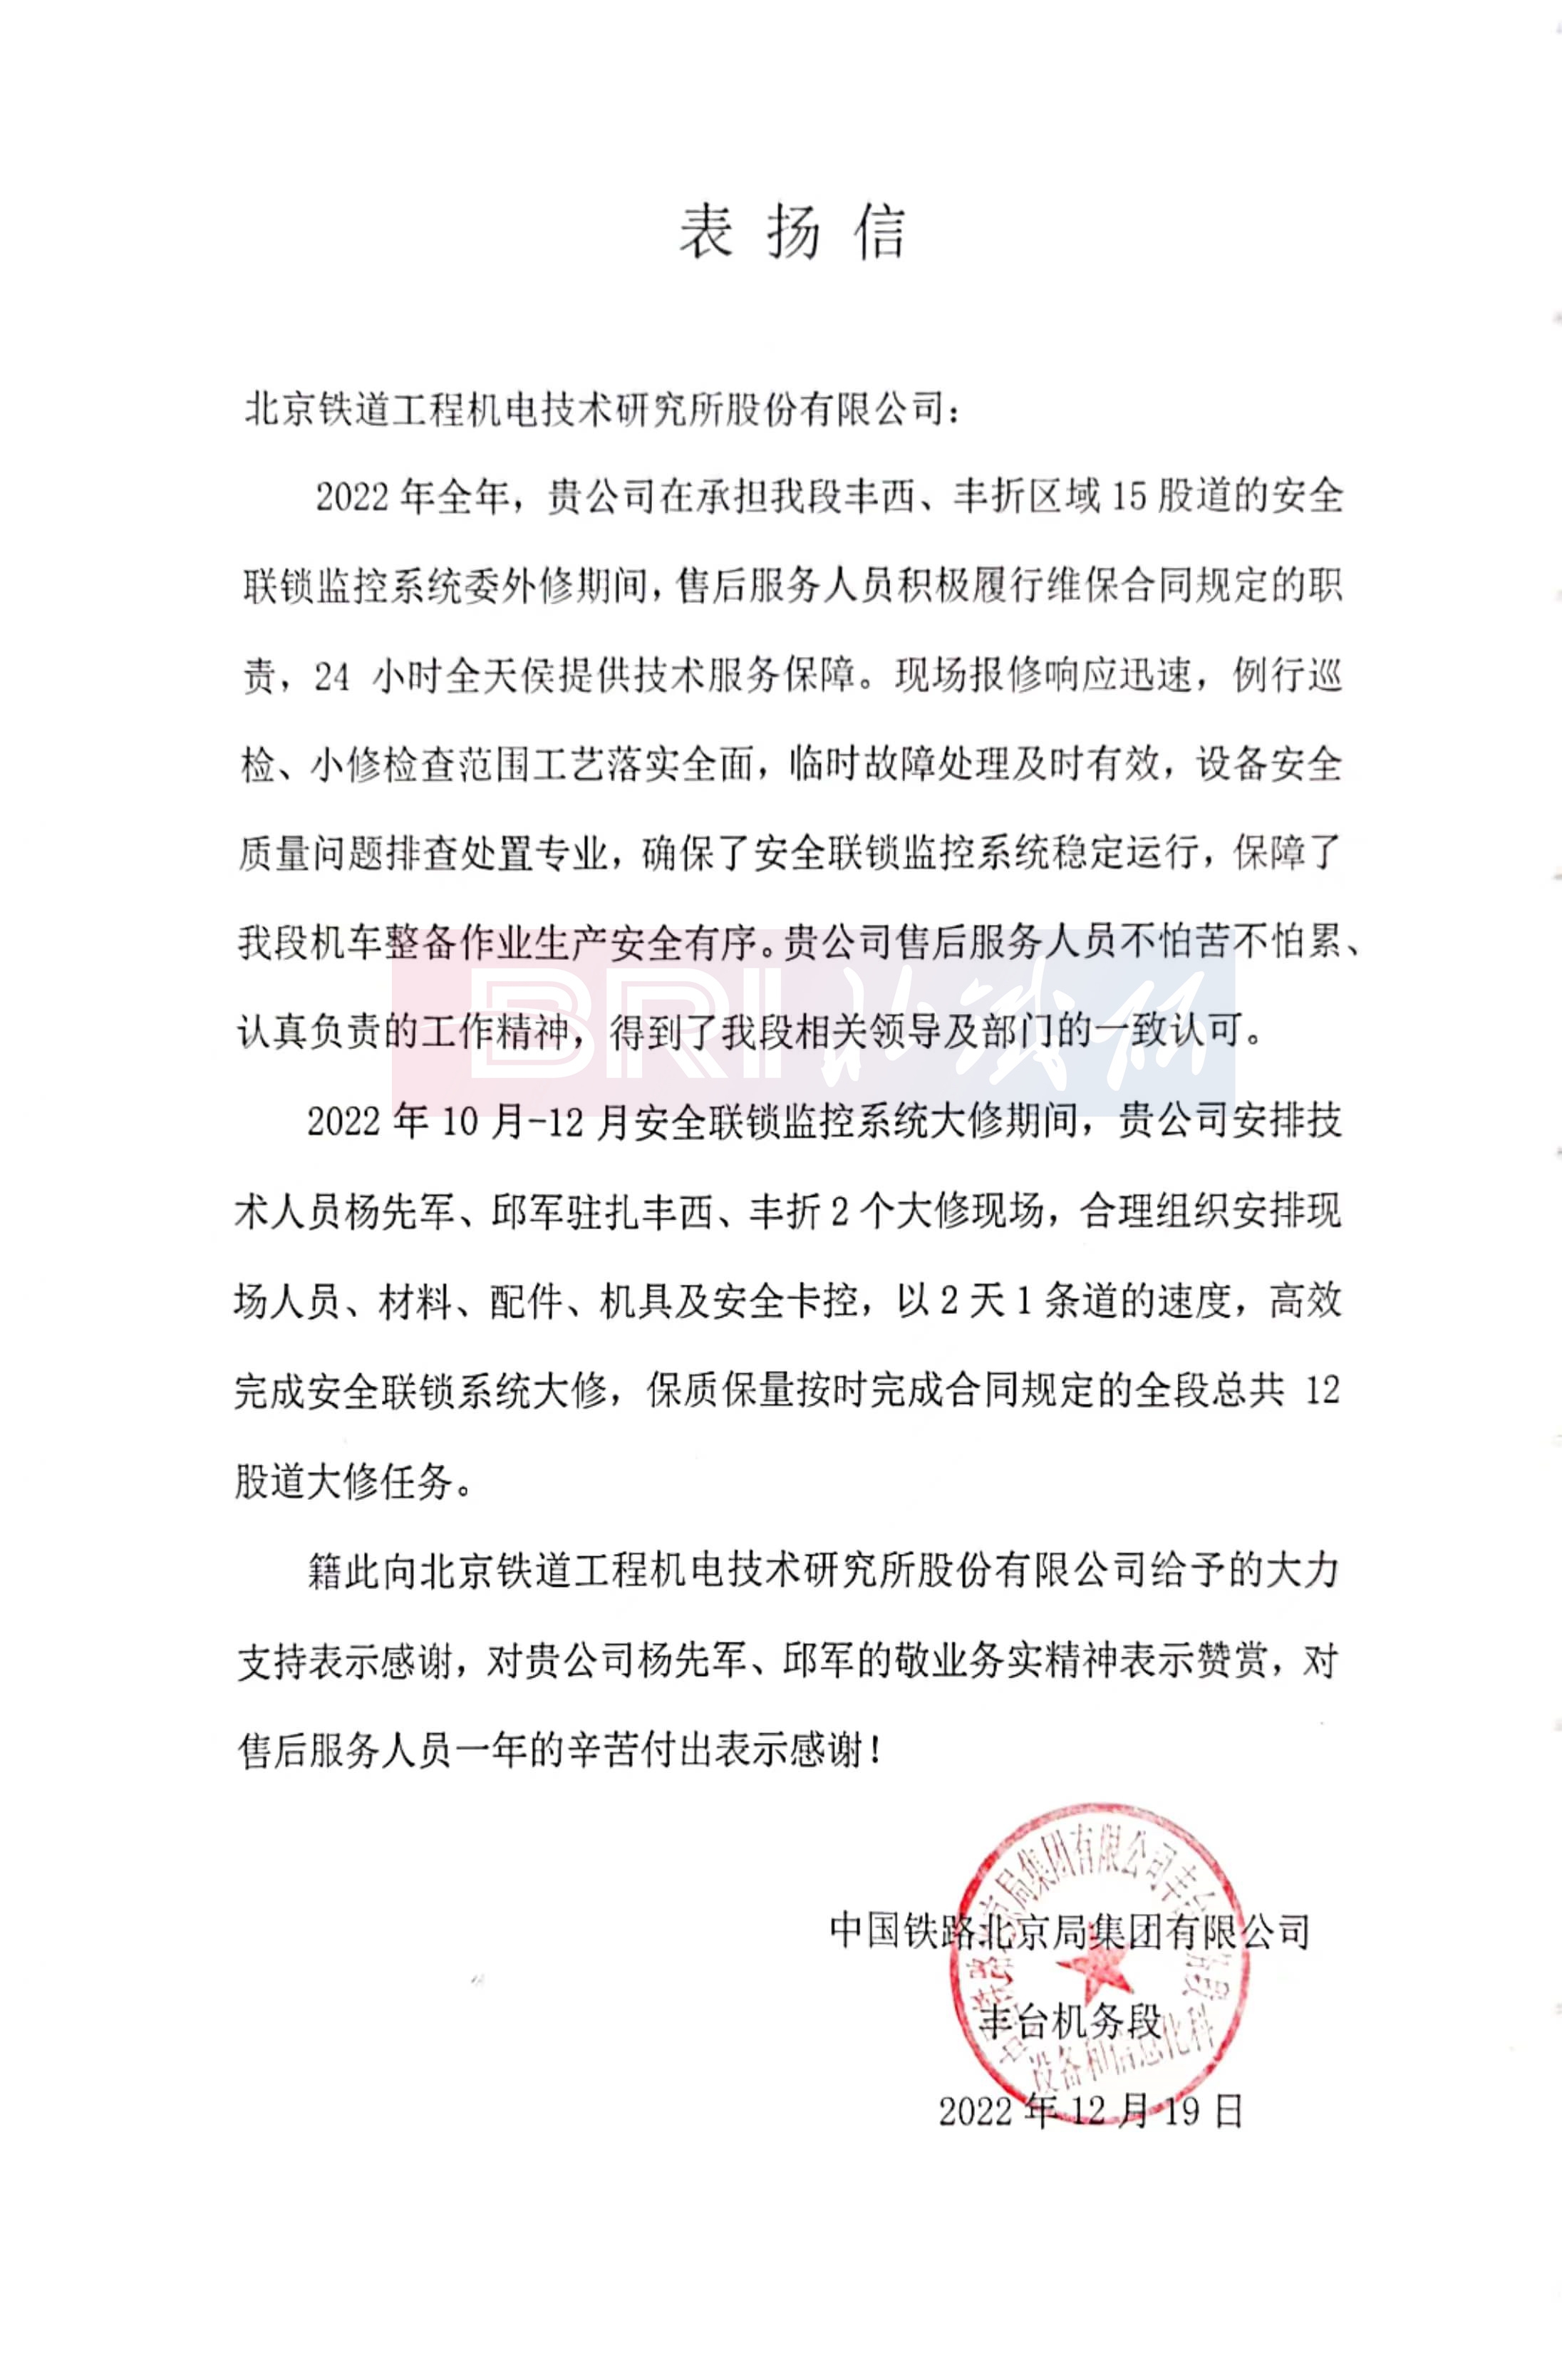 The commendation letter from Fengtai Locomotive Depot